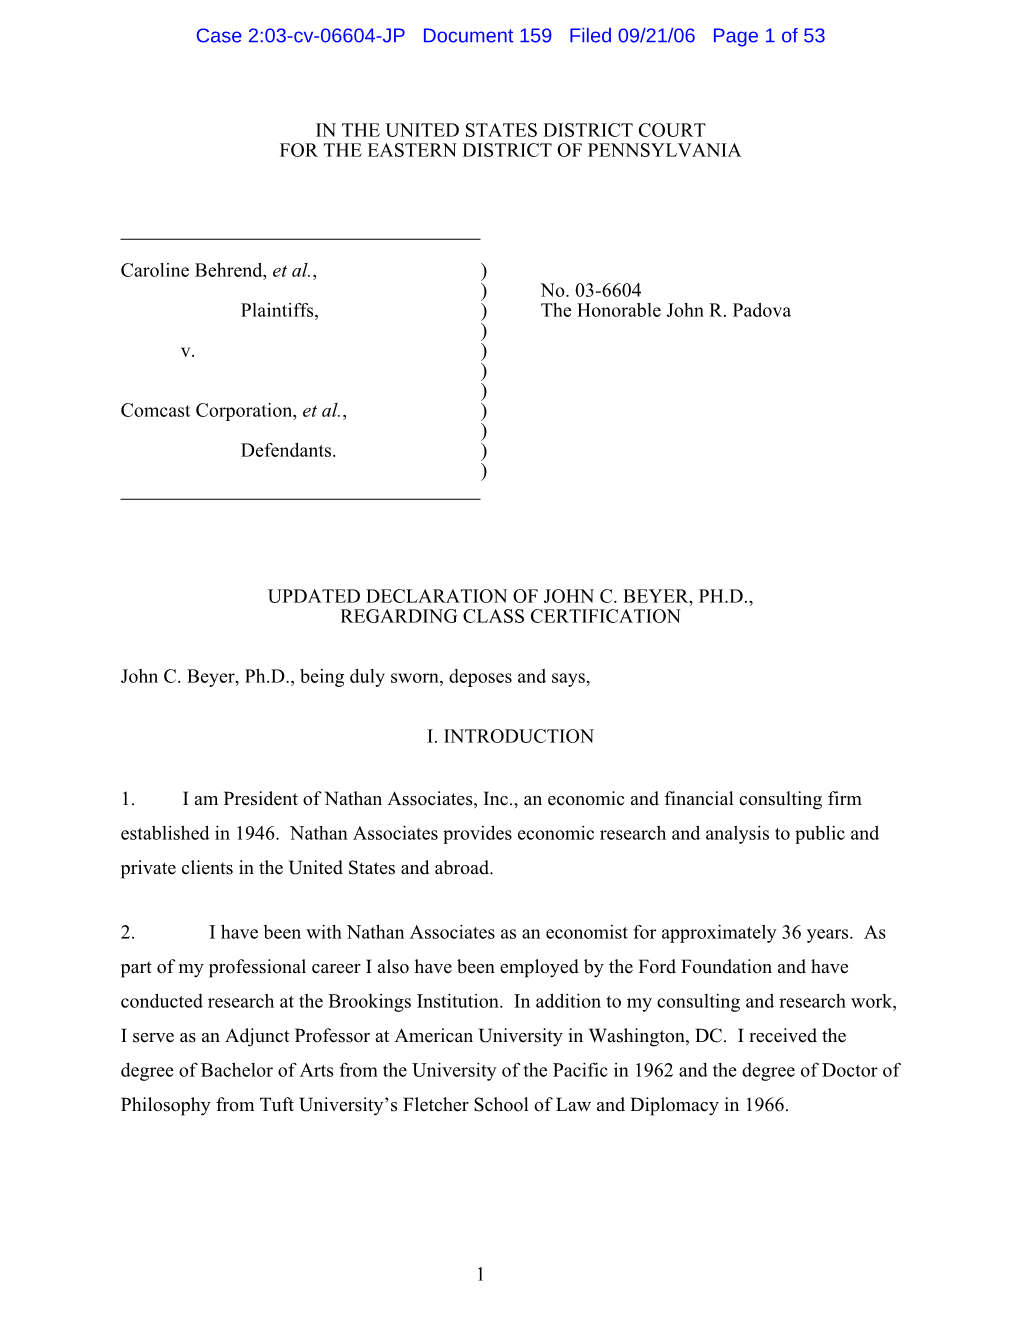 Case 2:03-Cv-06604-JP Document 159 Filed 09/21/06 Page 1 of 53